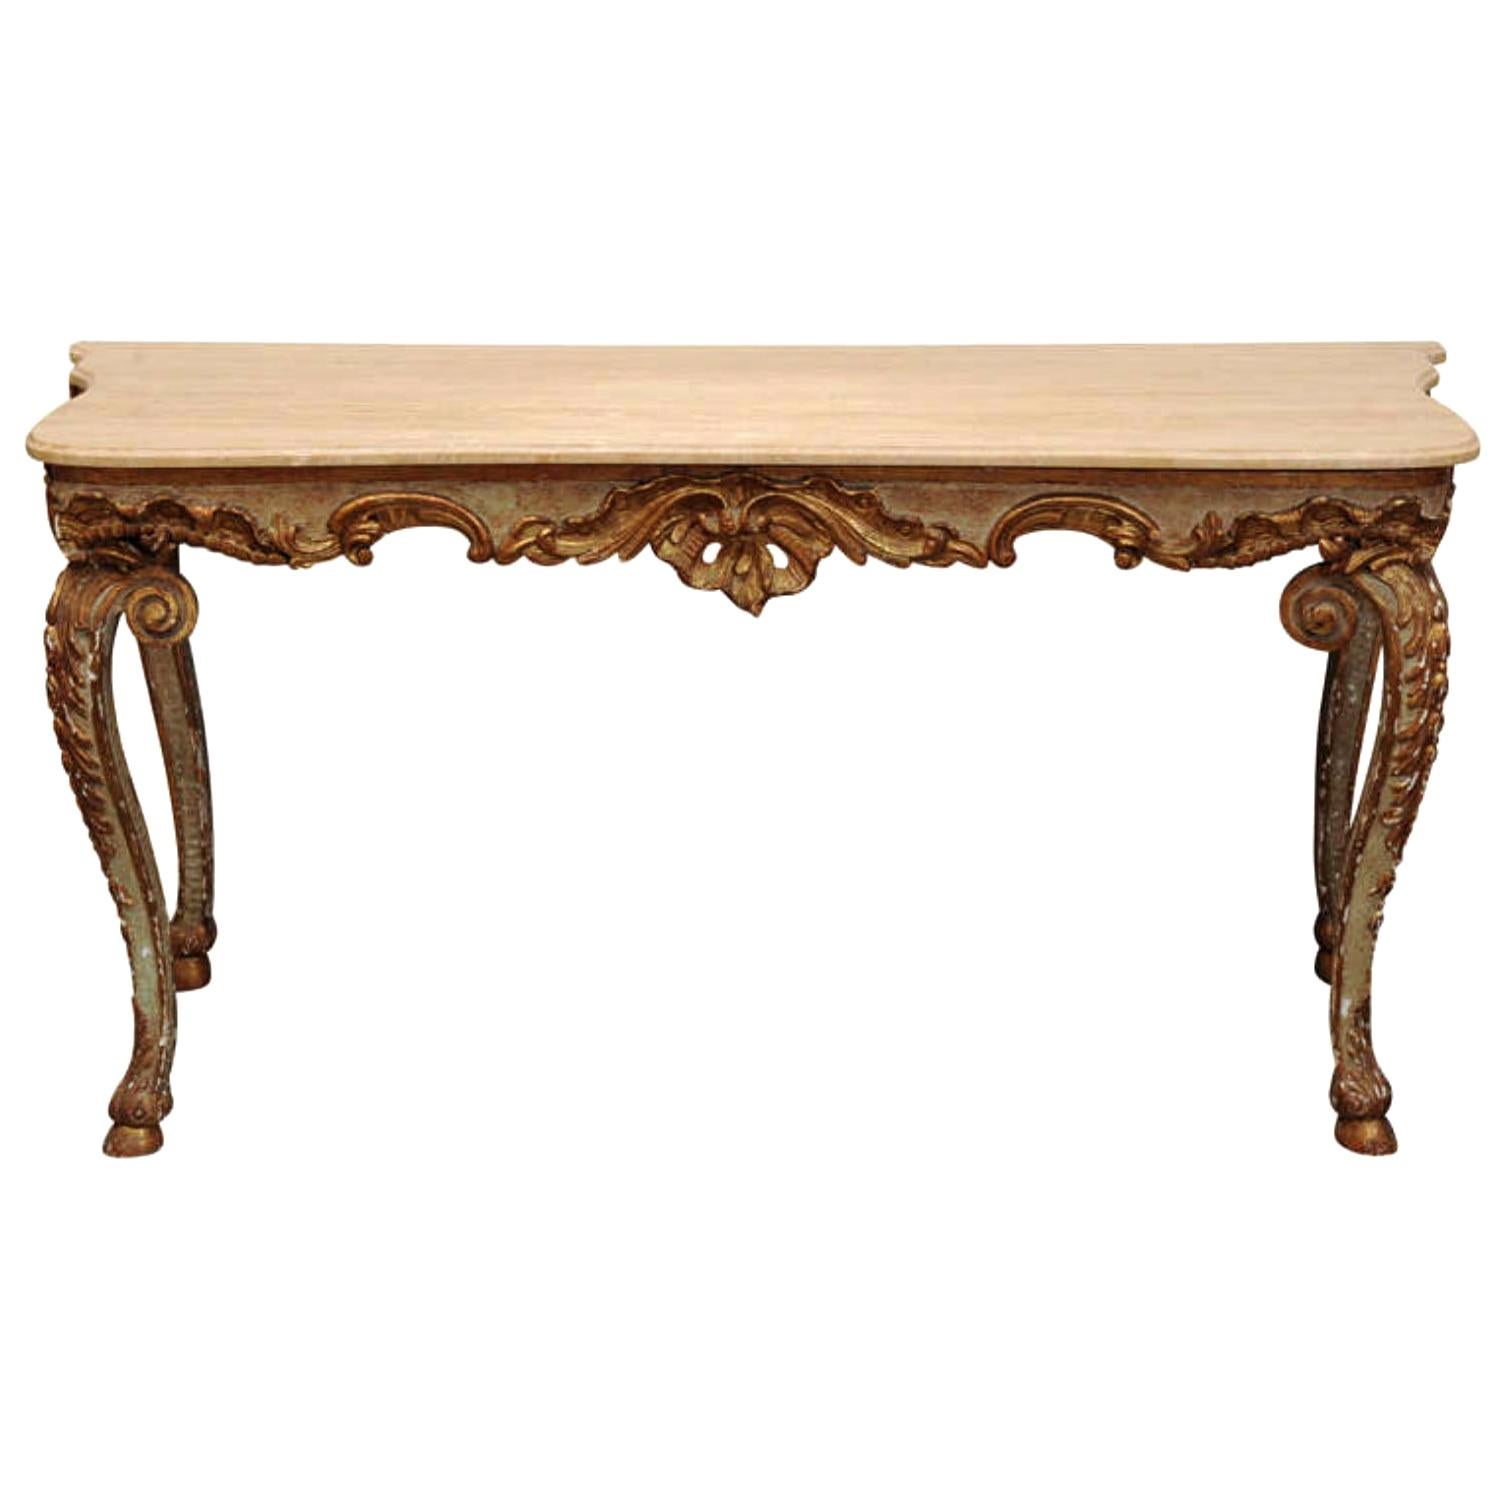 Rococo Giltwood Console Table with Cabriole Legs For Sale